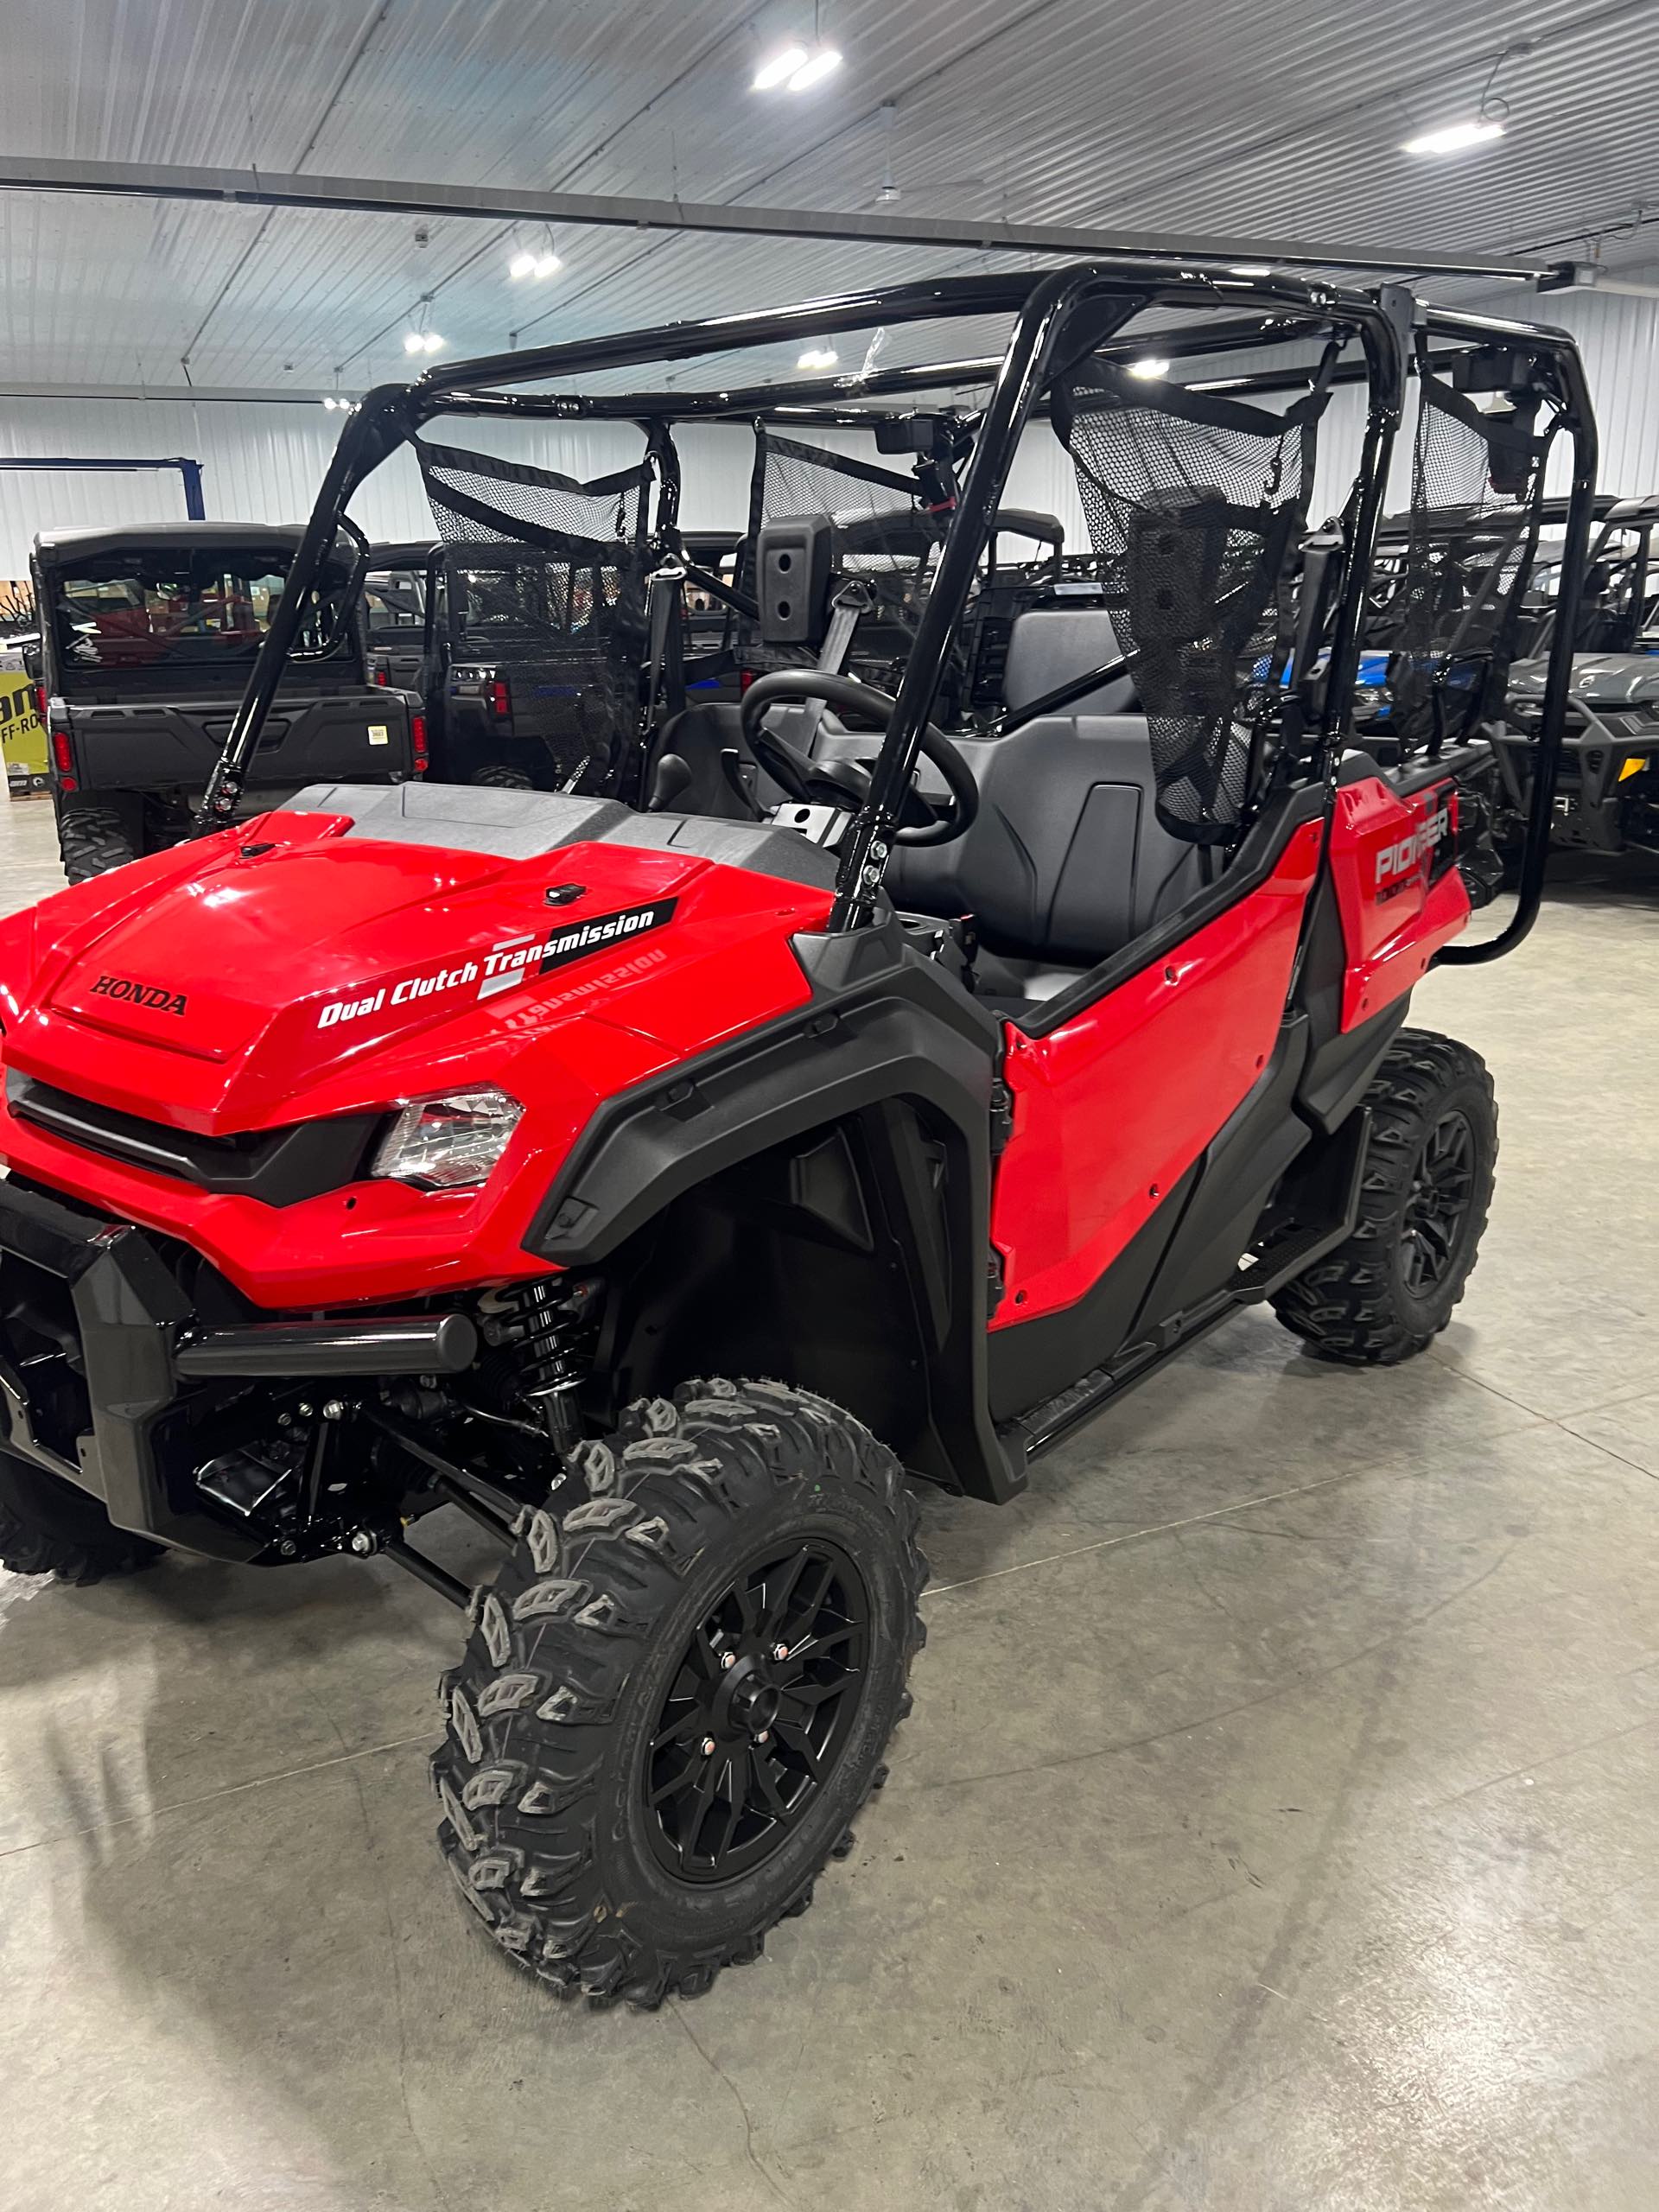 2023 Honda Pioneer 1000-5 Deluxe at Iron Hill Powersports